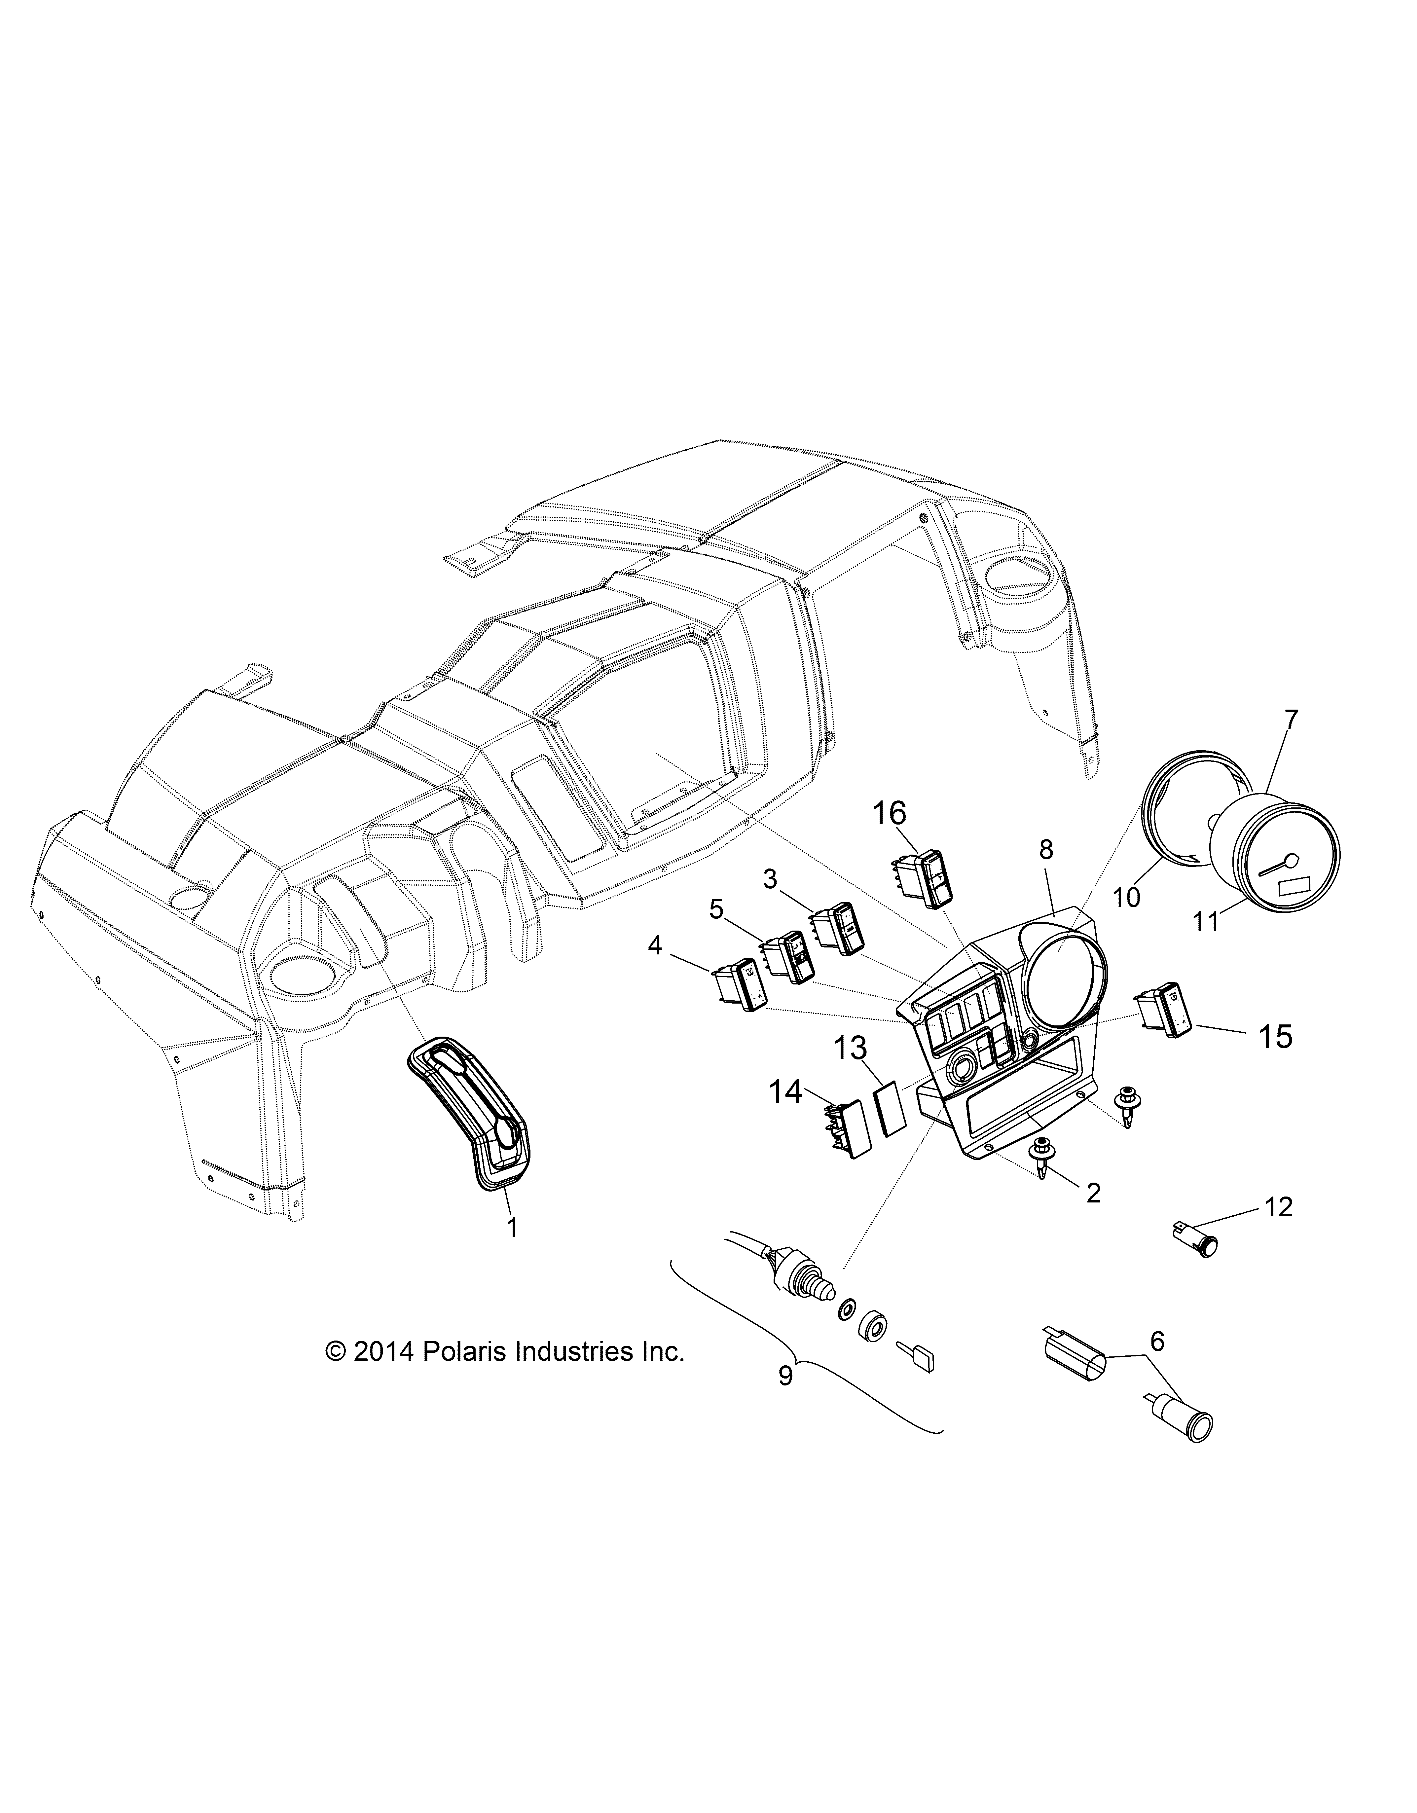 Part Number : 2412776 SPEEDO ASSEMBLY